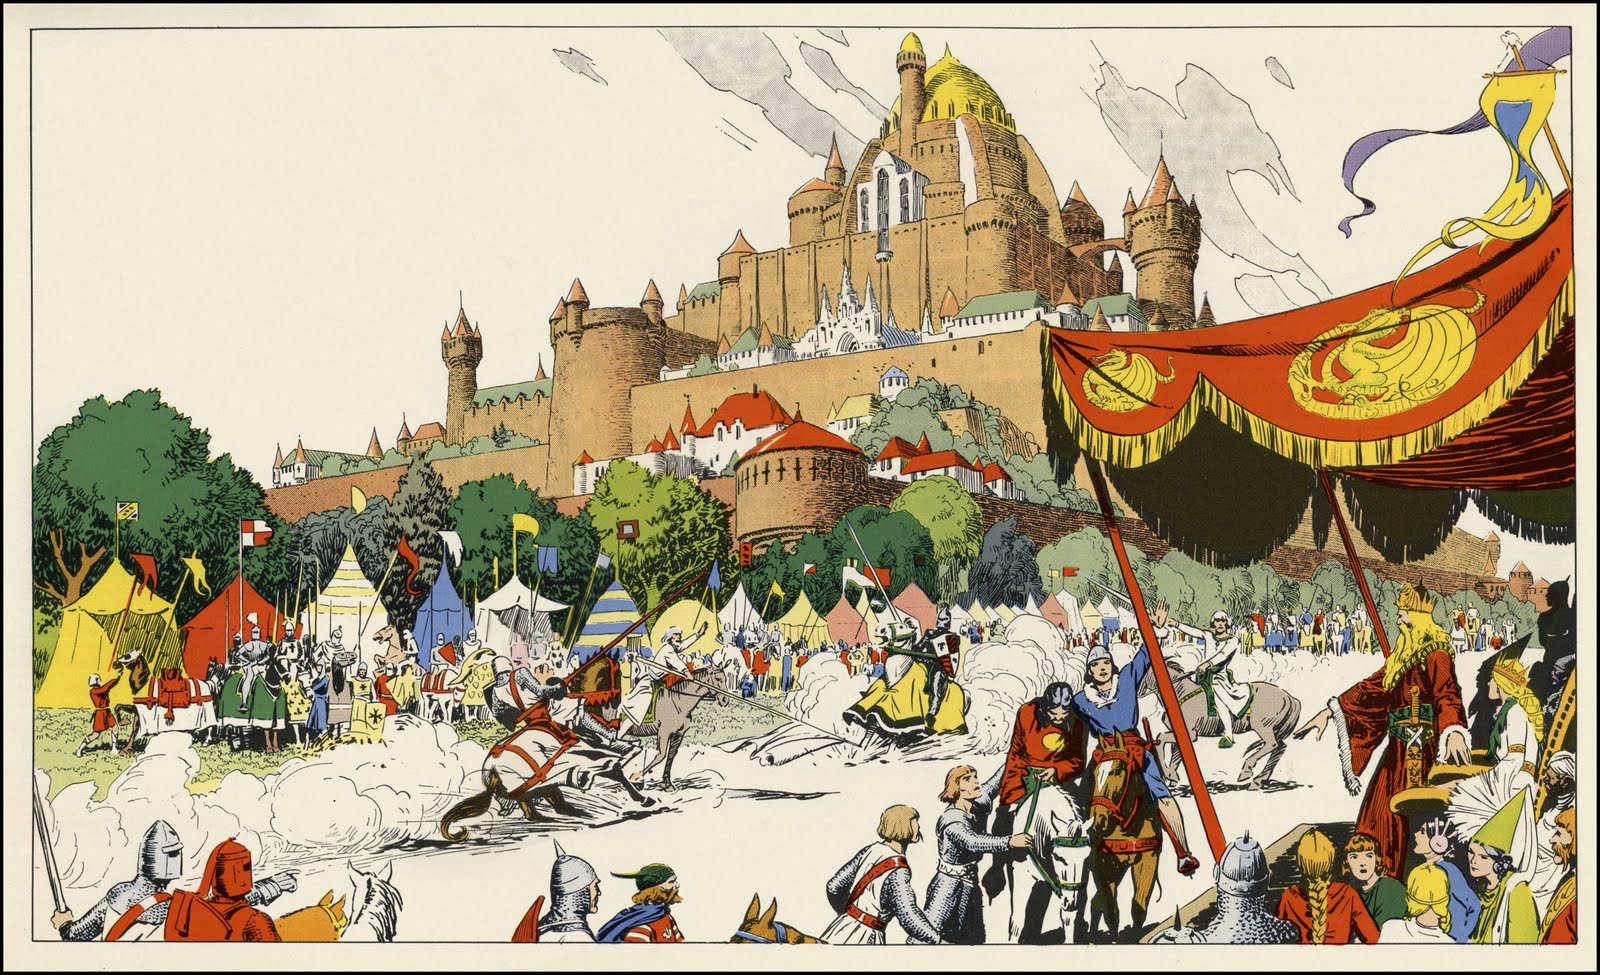 Camelot tournament scene from Prince Valiant by Hal Foster